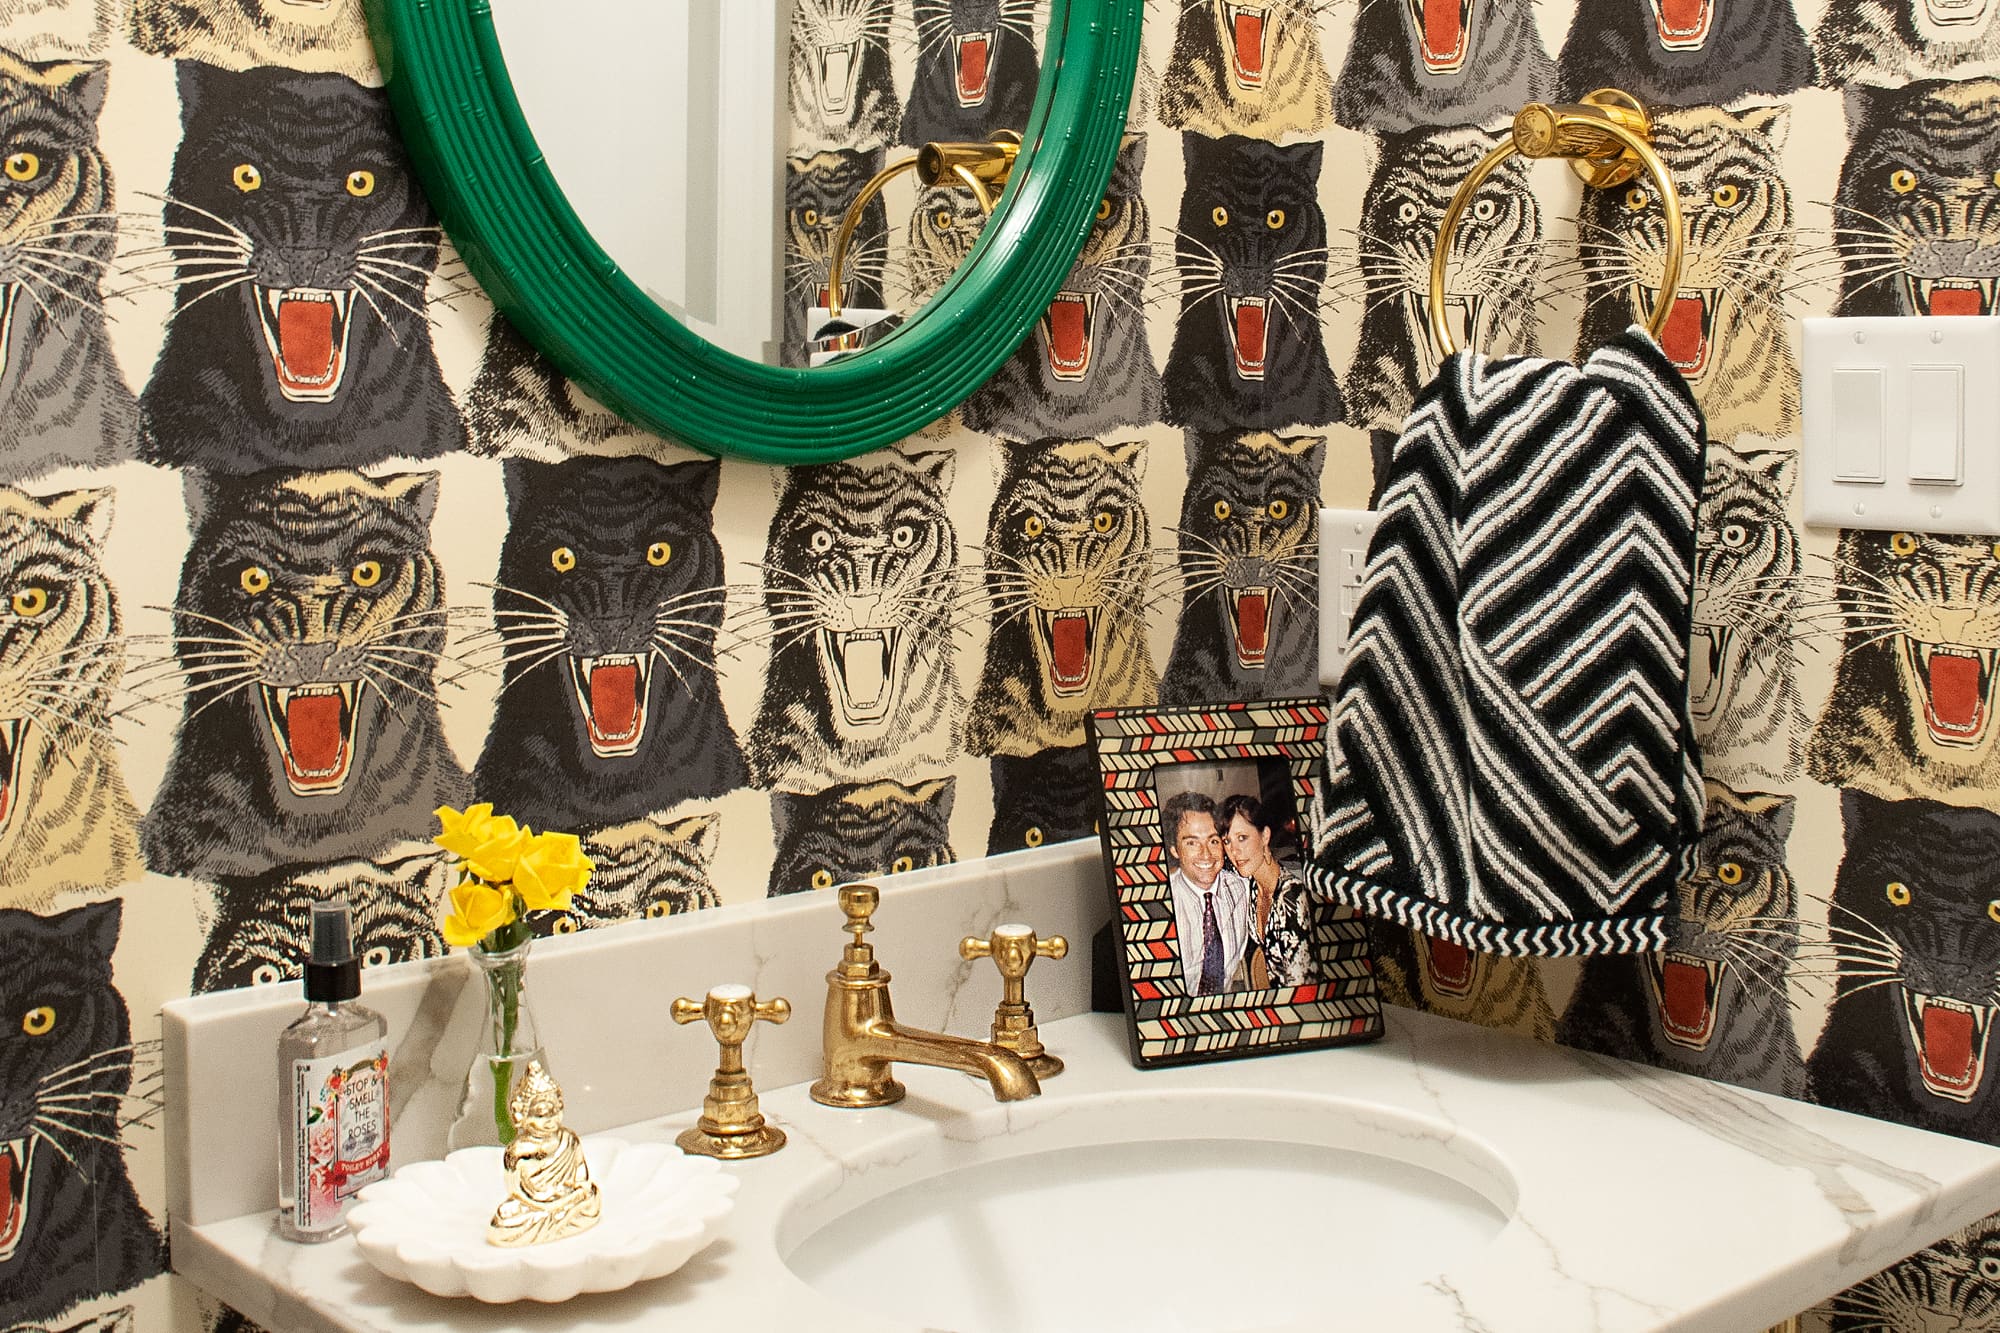 Luxury Bathroom Accessories That Transformed Our Space - Color & Chic